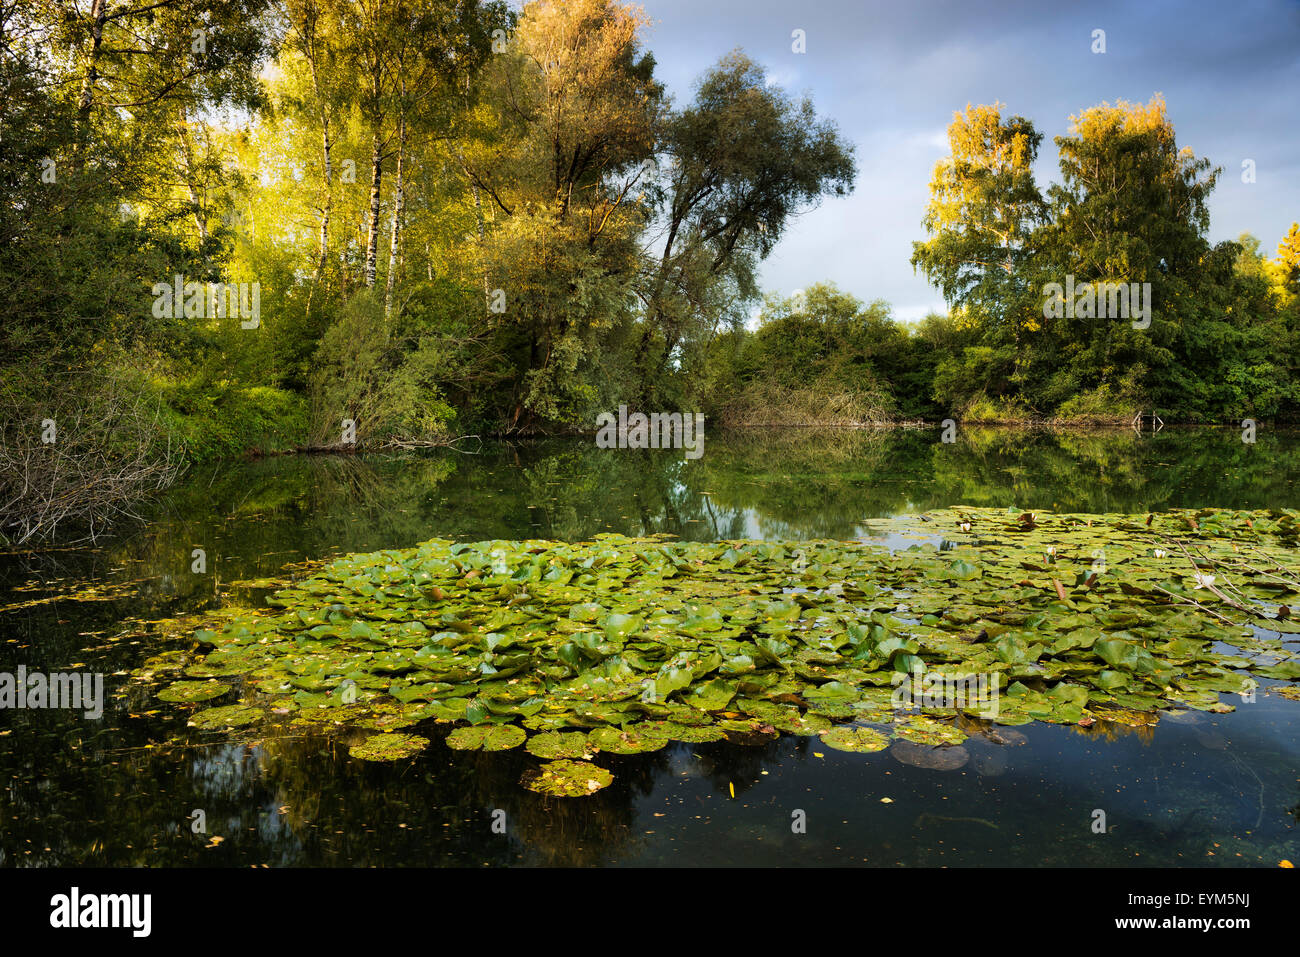 Water, pond, wildly, water lilies, mood, light, the sun, yellow, vegetation, evening, Stock Photo